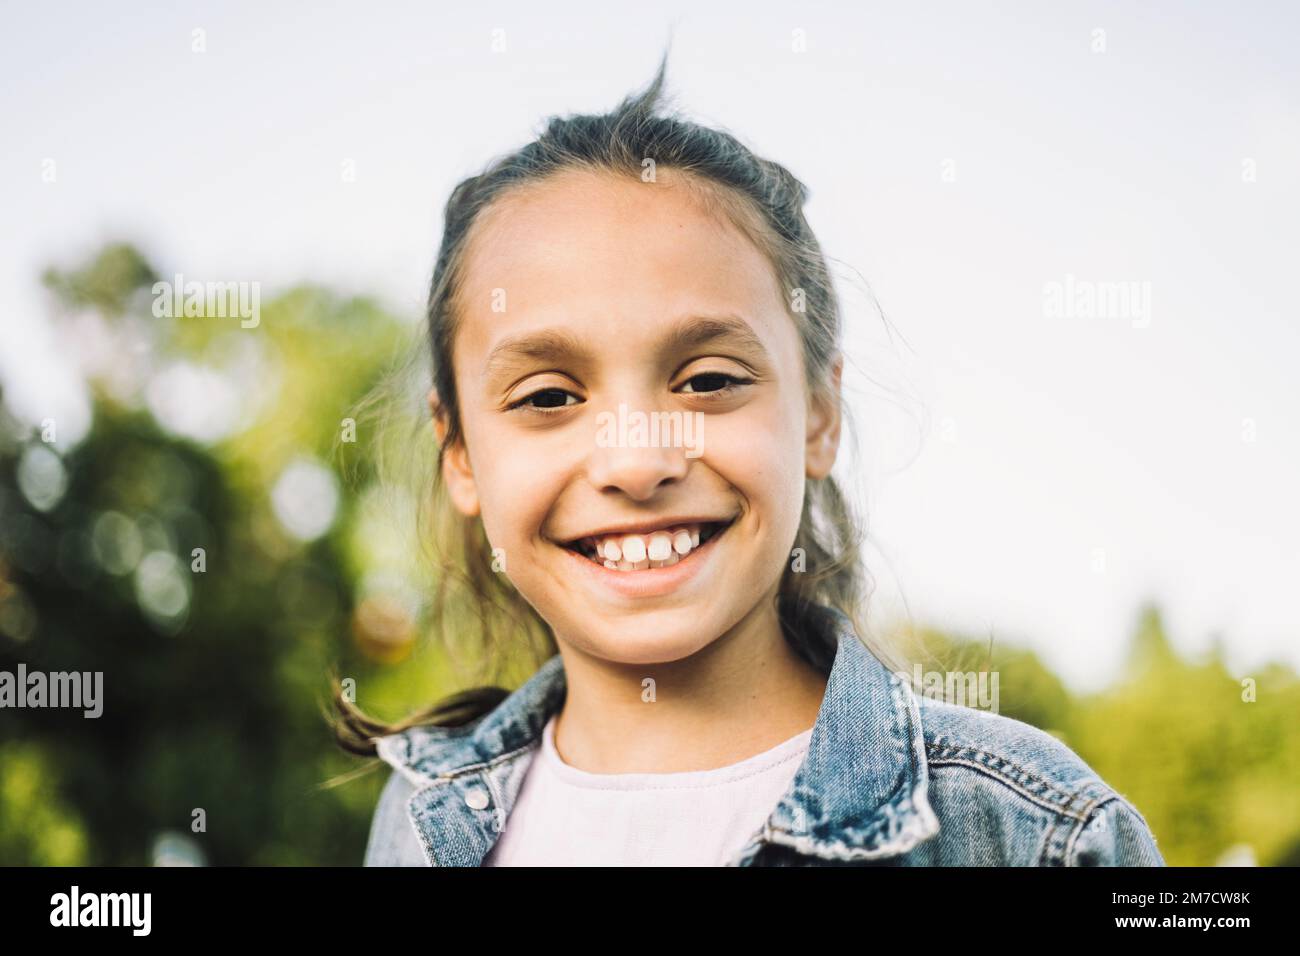 Portrait of happy girl with toothy smile Stock Photo